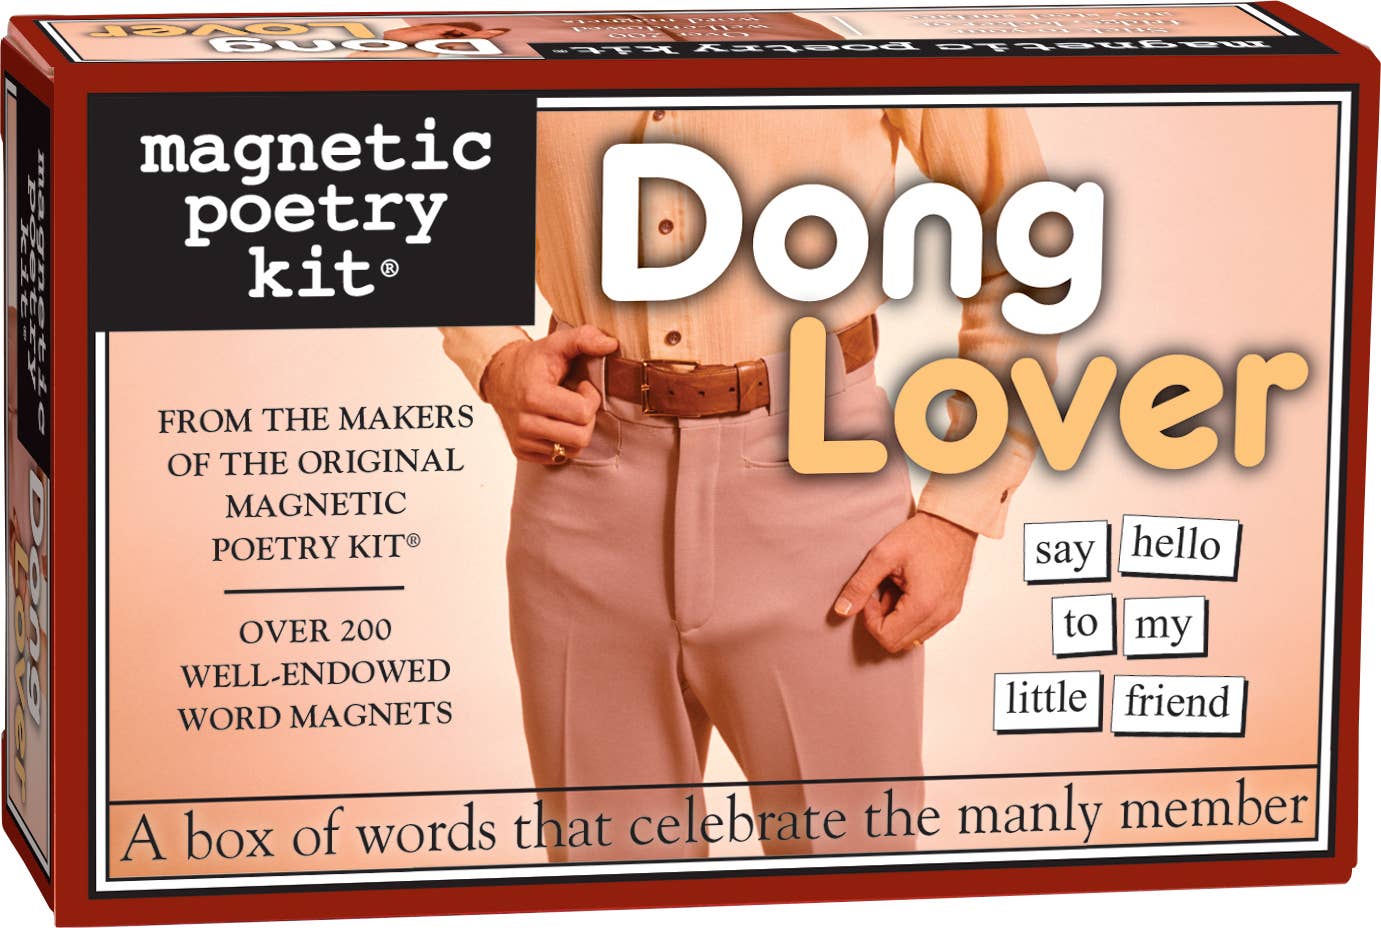 Magnetic Poetry - Dong Lover